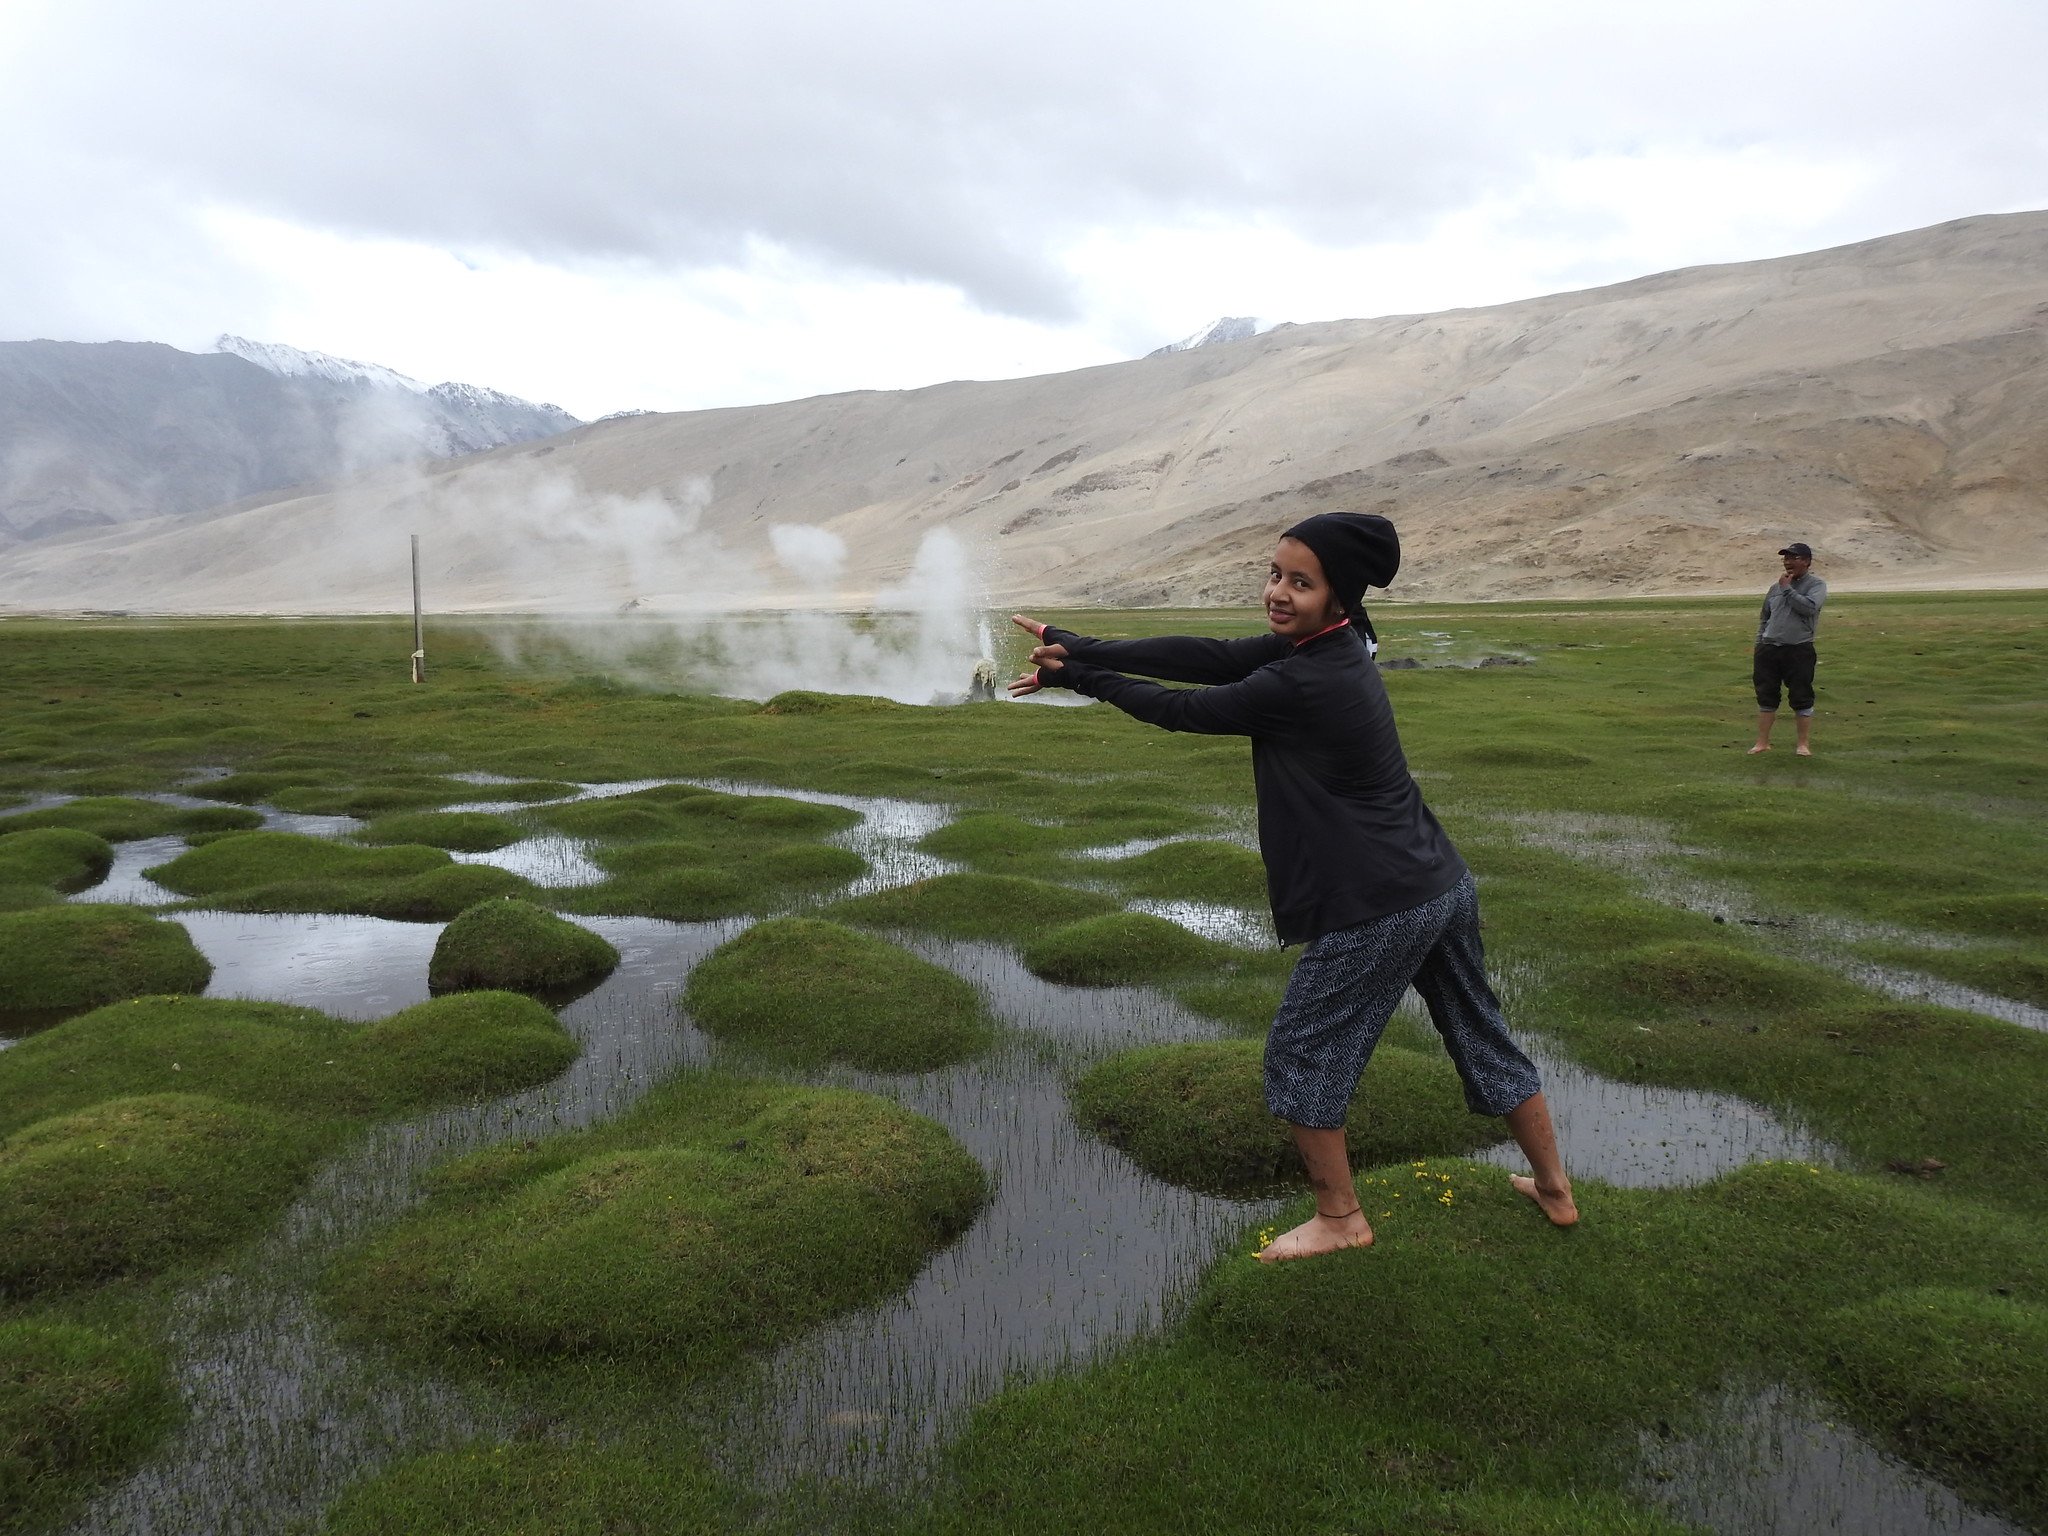 <p>Ladakh has huge potential for geothermal energy. Image by Geothermal Resources Council.</p>